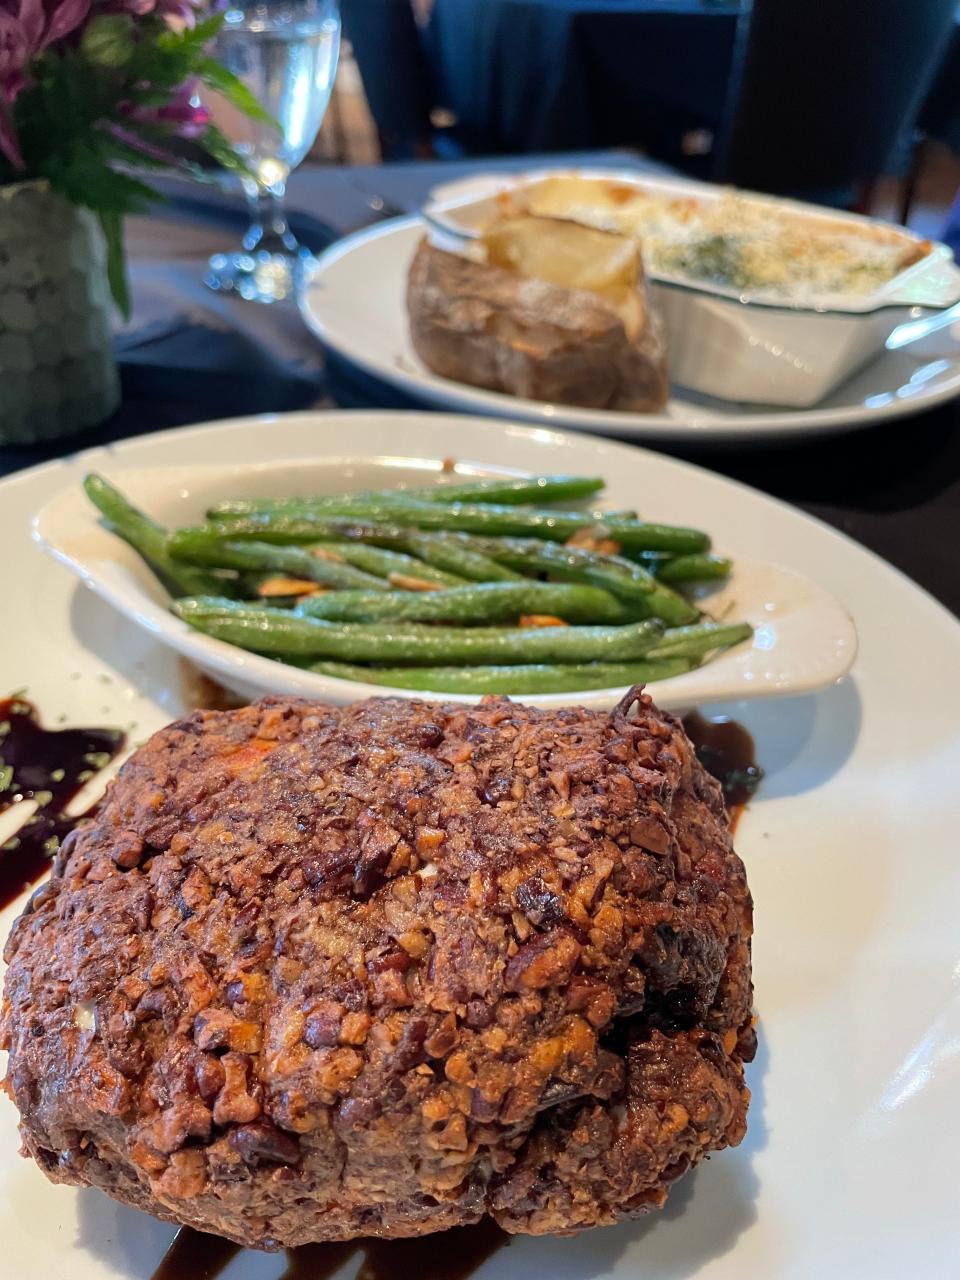 The stuffed pecan chicken breast at Thistle and Brier is stuffed with both goat cheese and Gouda and encrusted with chopped pecans and comes with two sides. Pictured here are the green beans almondine and a baked potato.